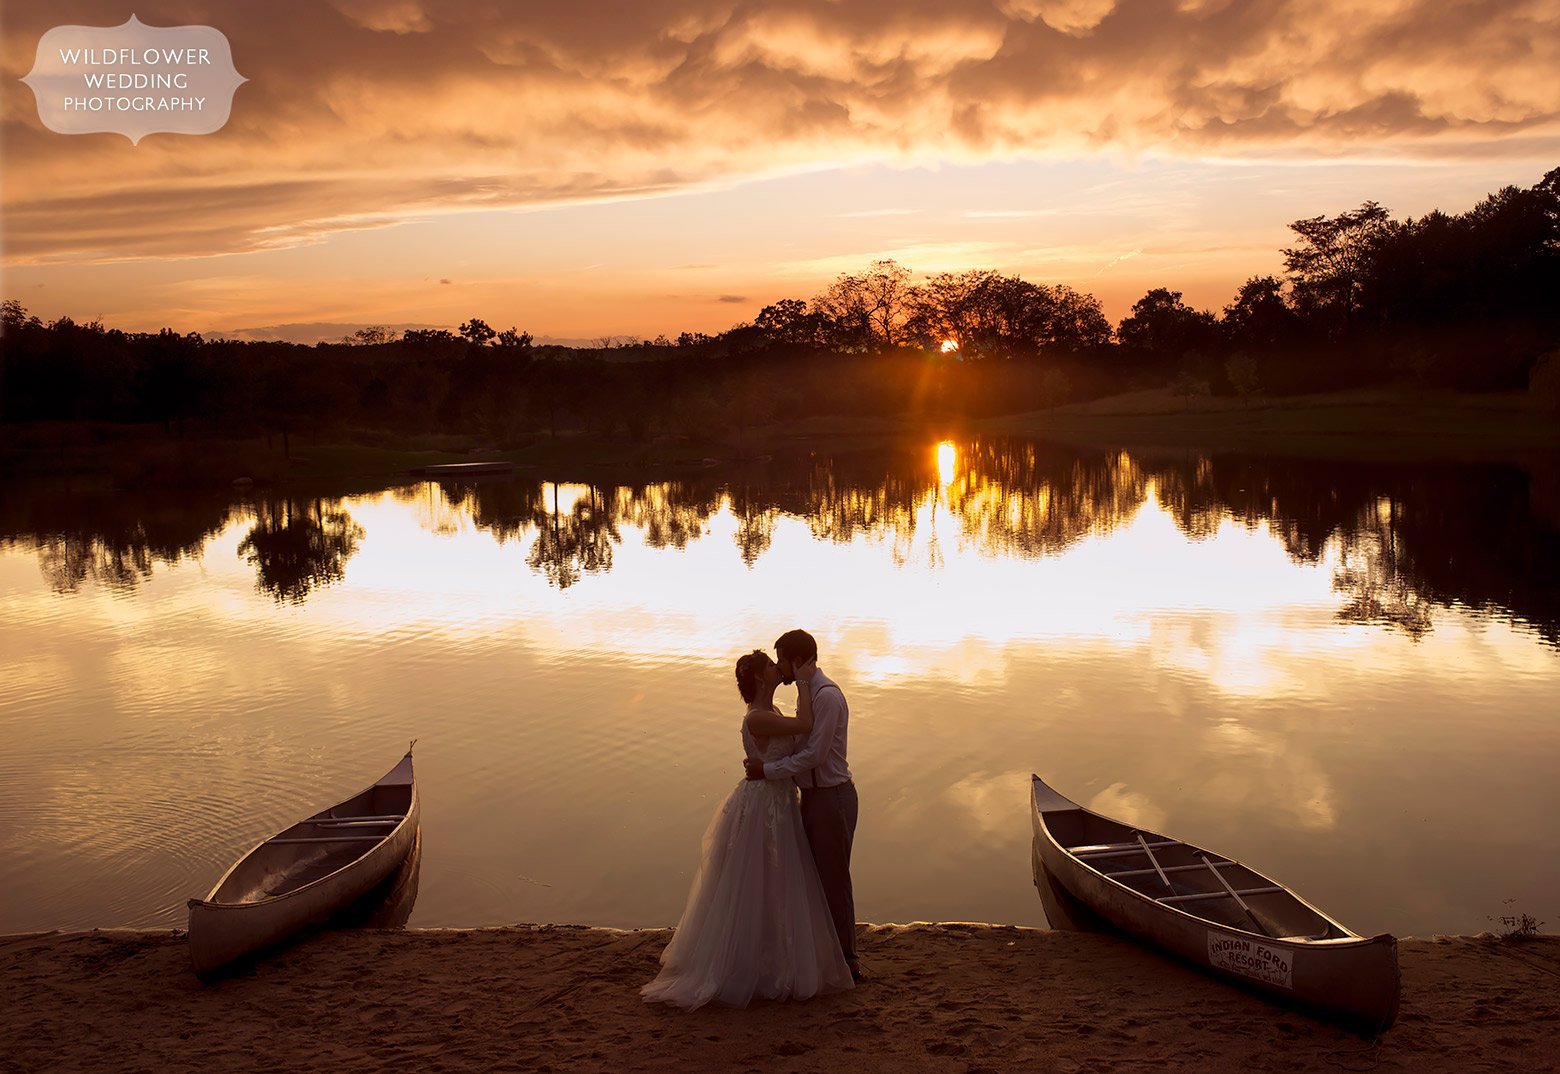 Best wedding photographer in Hermann, Missouri captures bride and groom at sunset by lake in Hermann, MO.